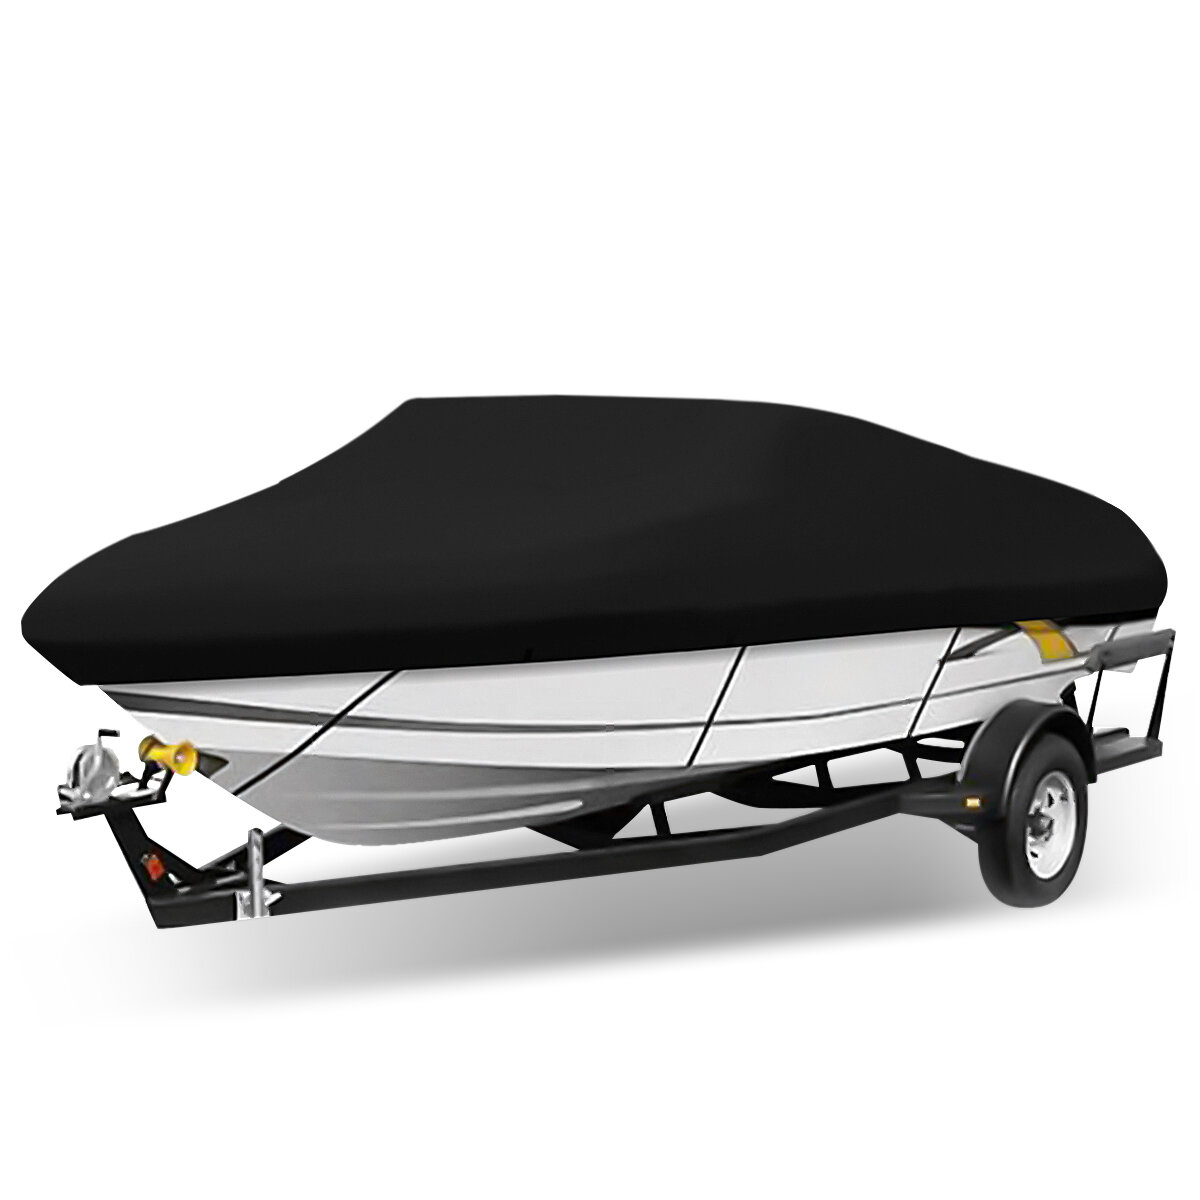 

ELuto 11-13ft 14-16ft 17-19ft 20-22ft V-shape Boat Cover Waterproof UV-Protected Heavy Duty 210D Trailerable Canvas Blac